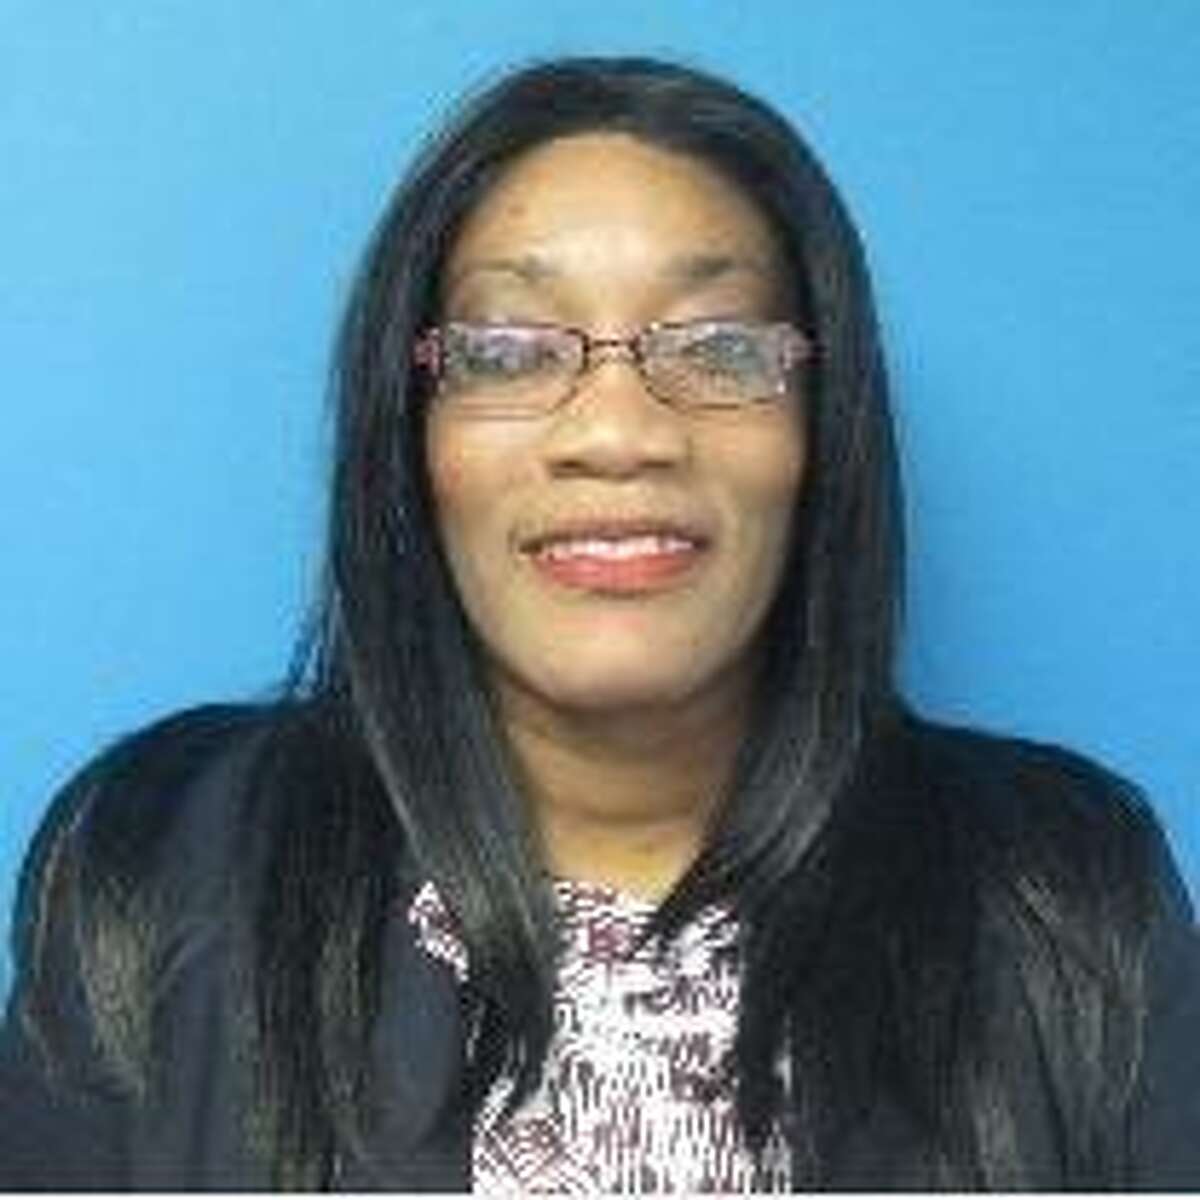 Marlene Bovell was fired Wednesday for lying on her employment application, according to the Harris County District Attorney's office.